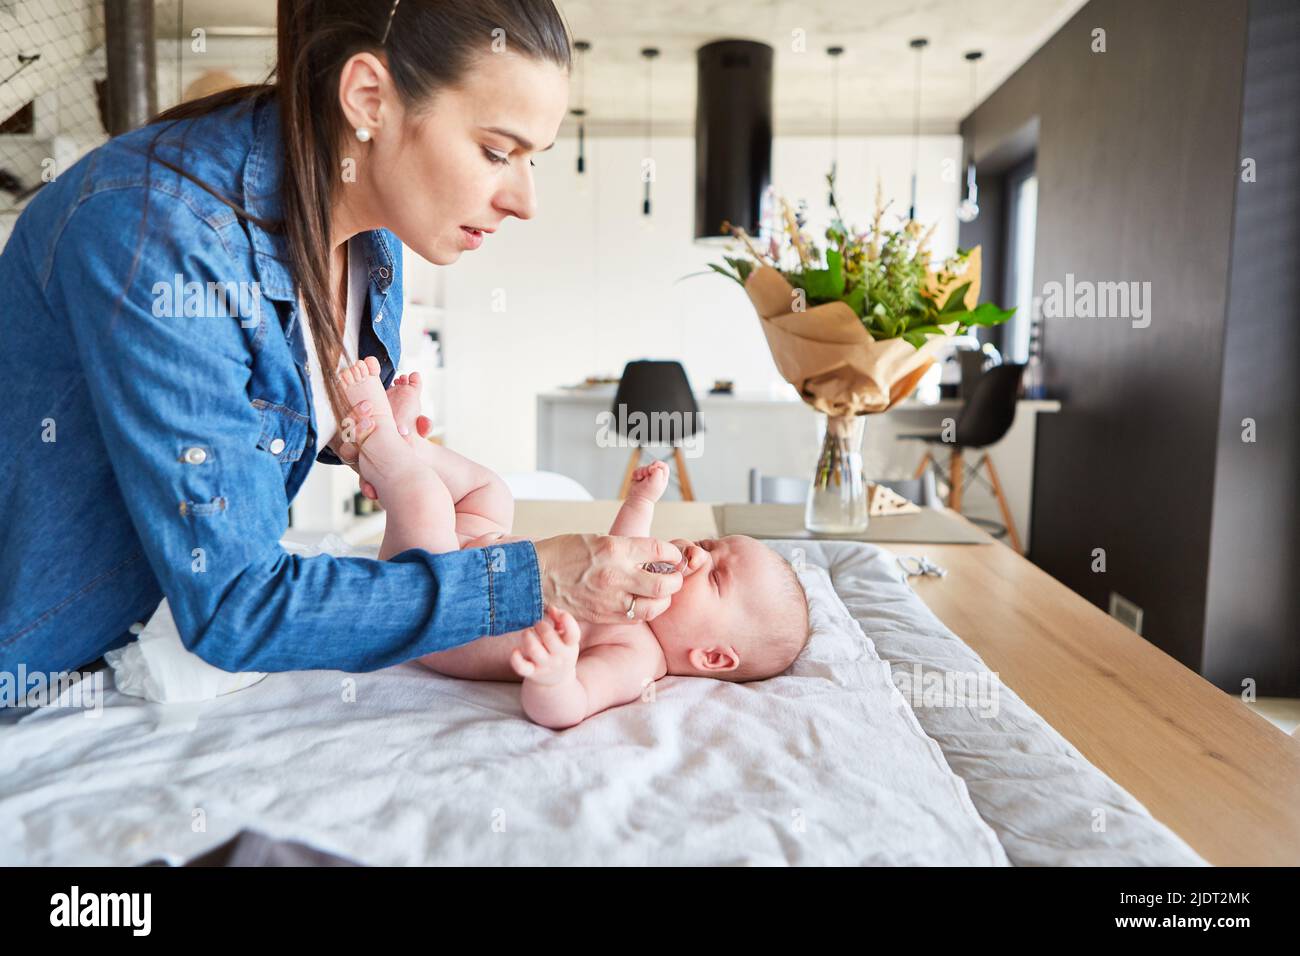 Caring mother gives her baby a pacifier for comfort while changing diaper Stock Photo